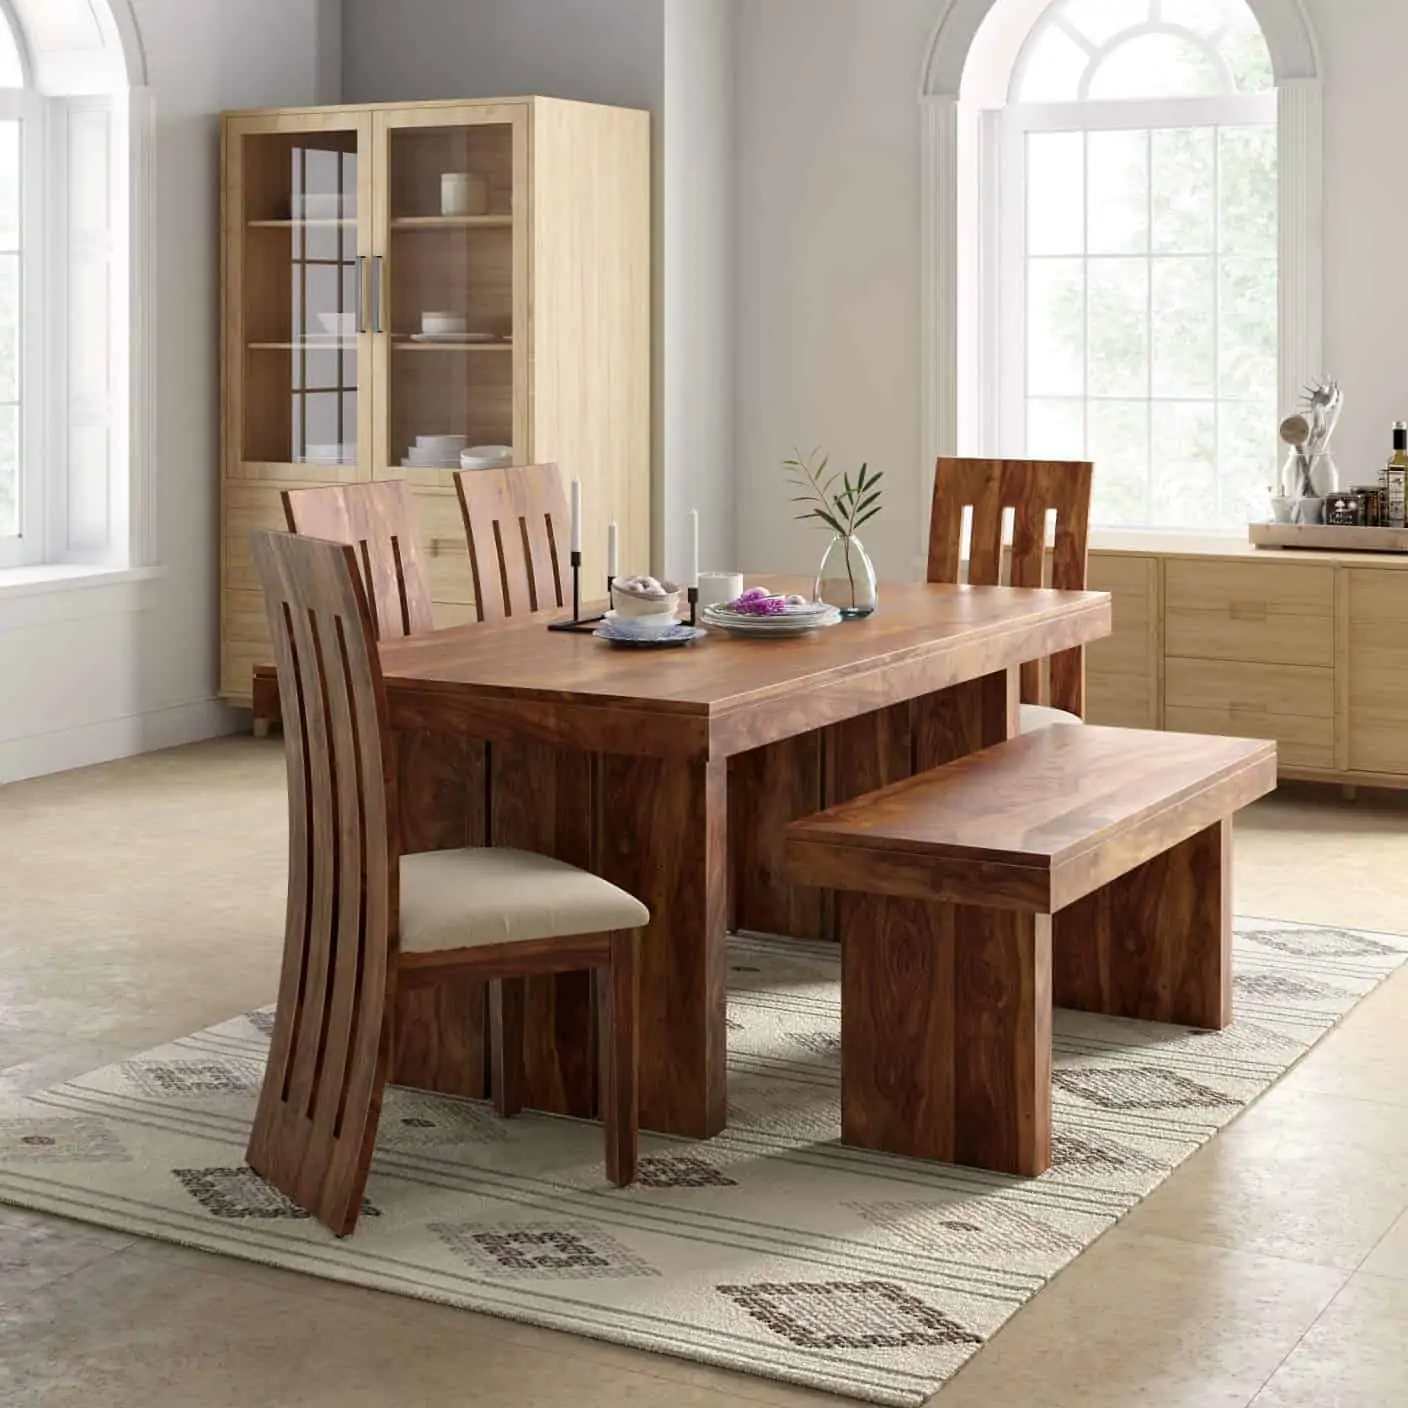 Wooden polished dining table set with wooden bench and 4 chairs, with off white seating, in a room with cabinets